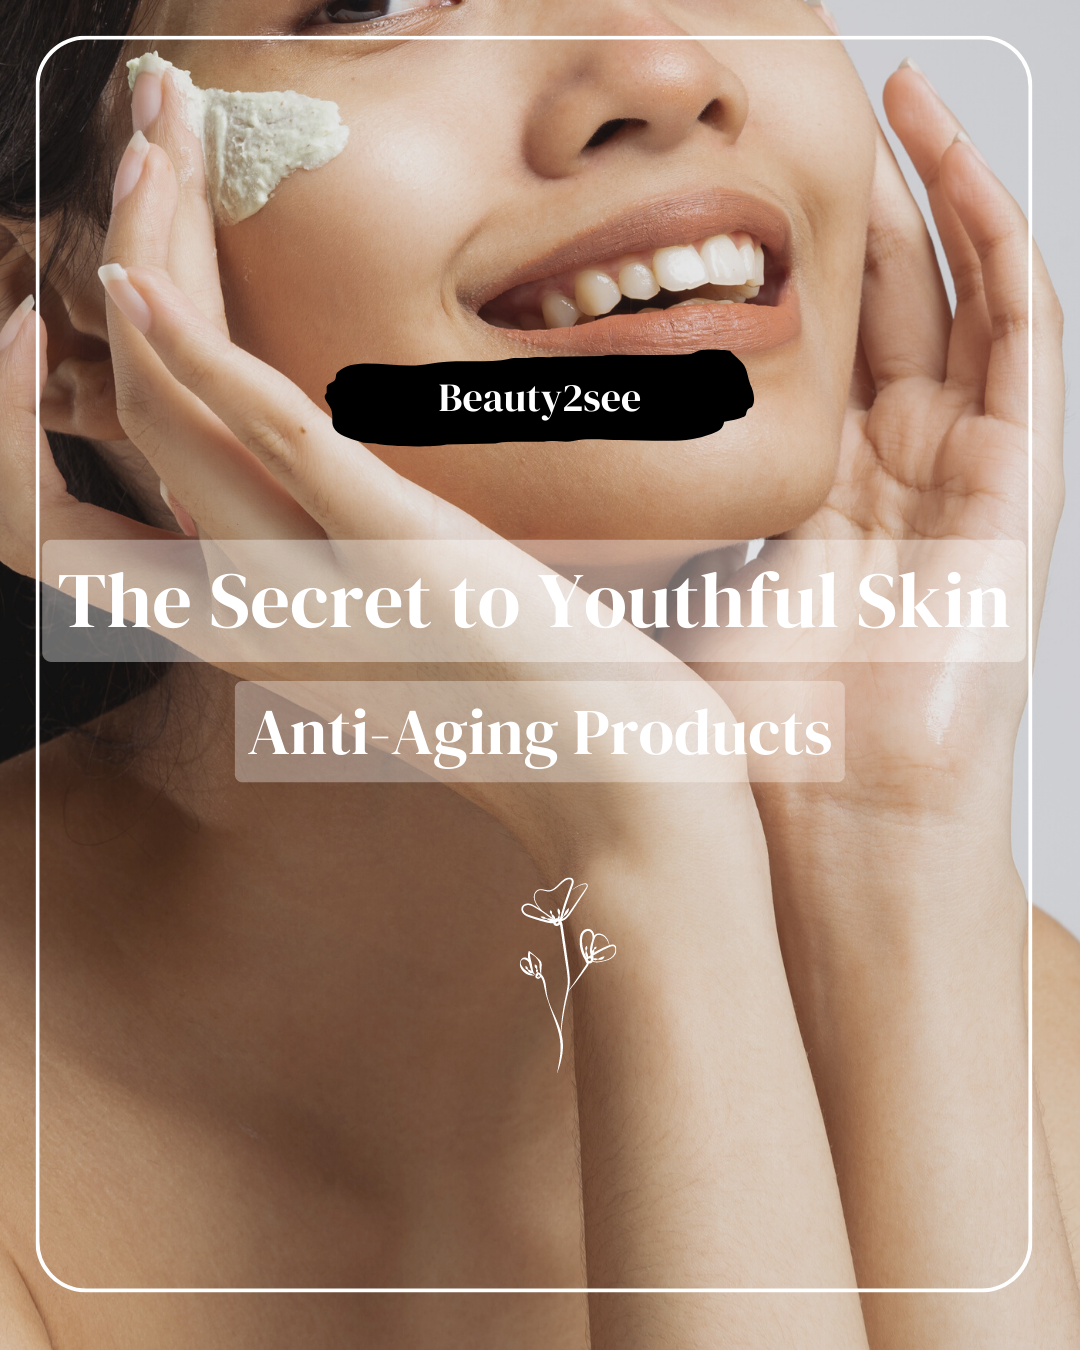 The Secret to Youthful Skin